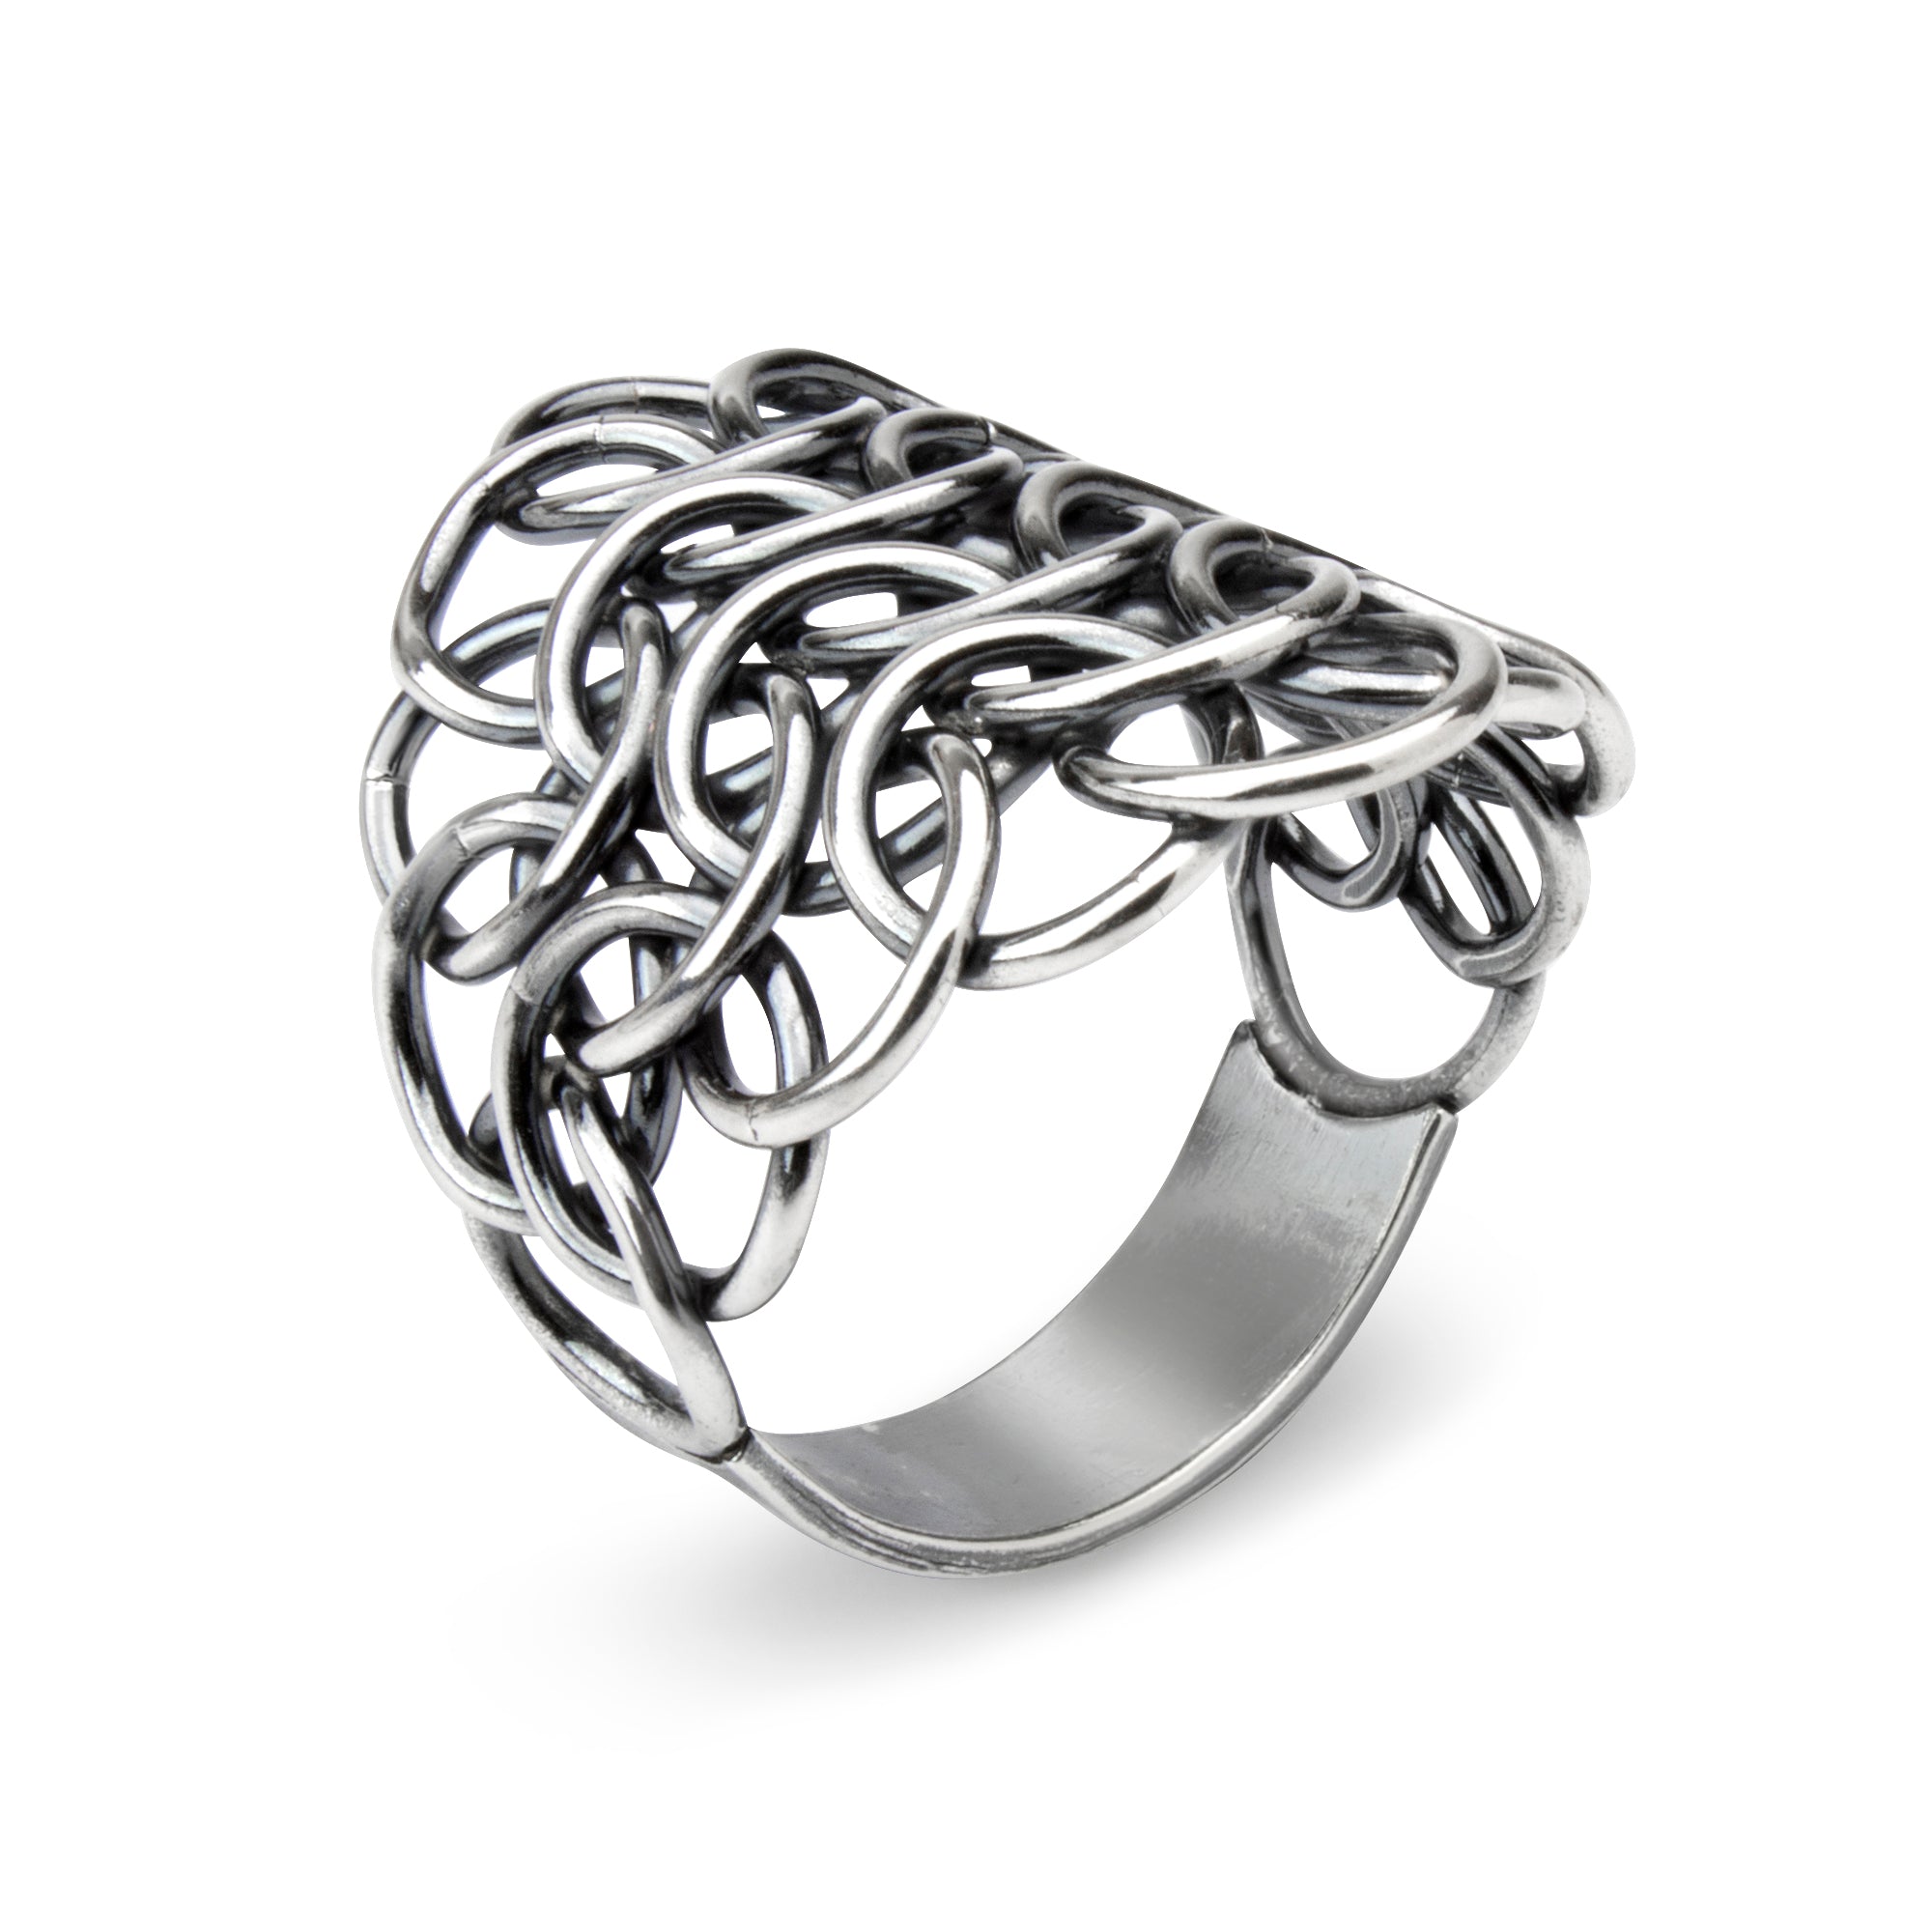 "Armorer's" Fused Chainmaille Statement Ring